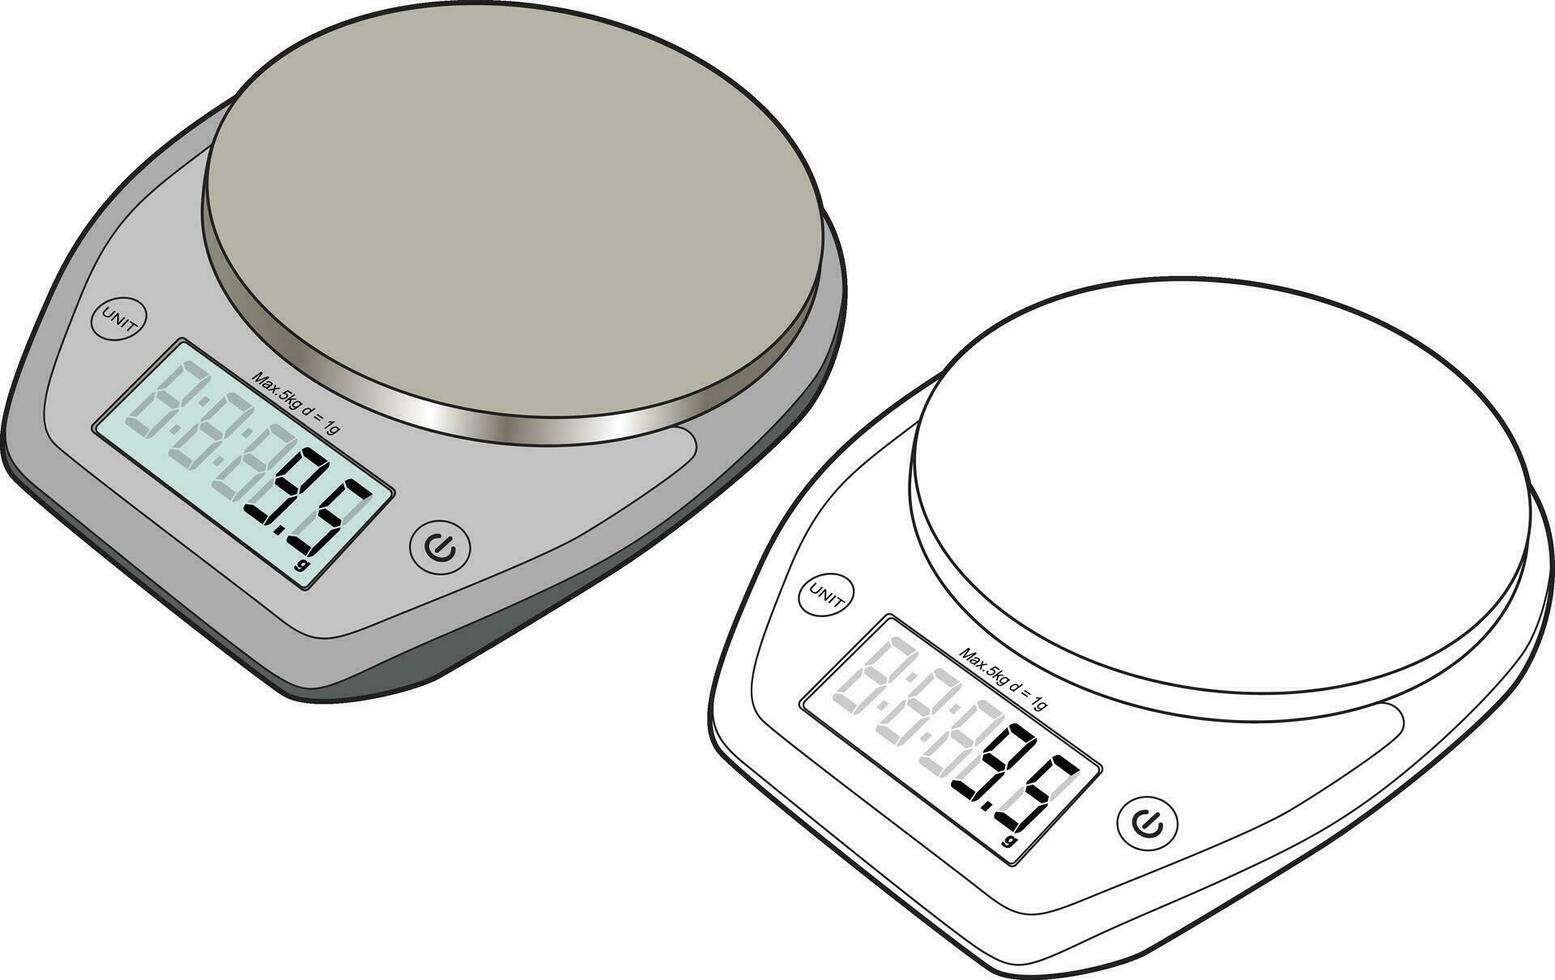 https://static.vecteezy.com/system/resources/previews/026/369/437/non_2x/digital-food-scale-illustration-kitchen-scale-and-baking-scale-for-electronic-food-measuring-device-image-vector.jpg